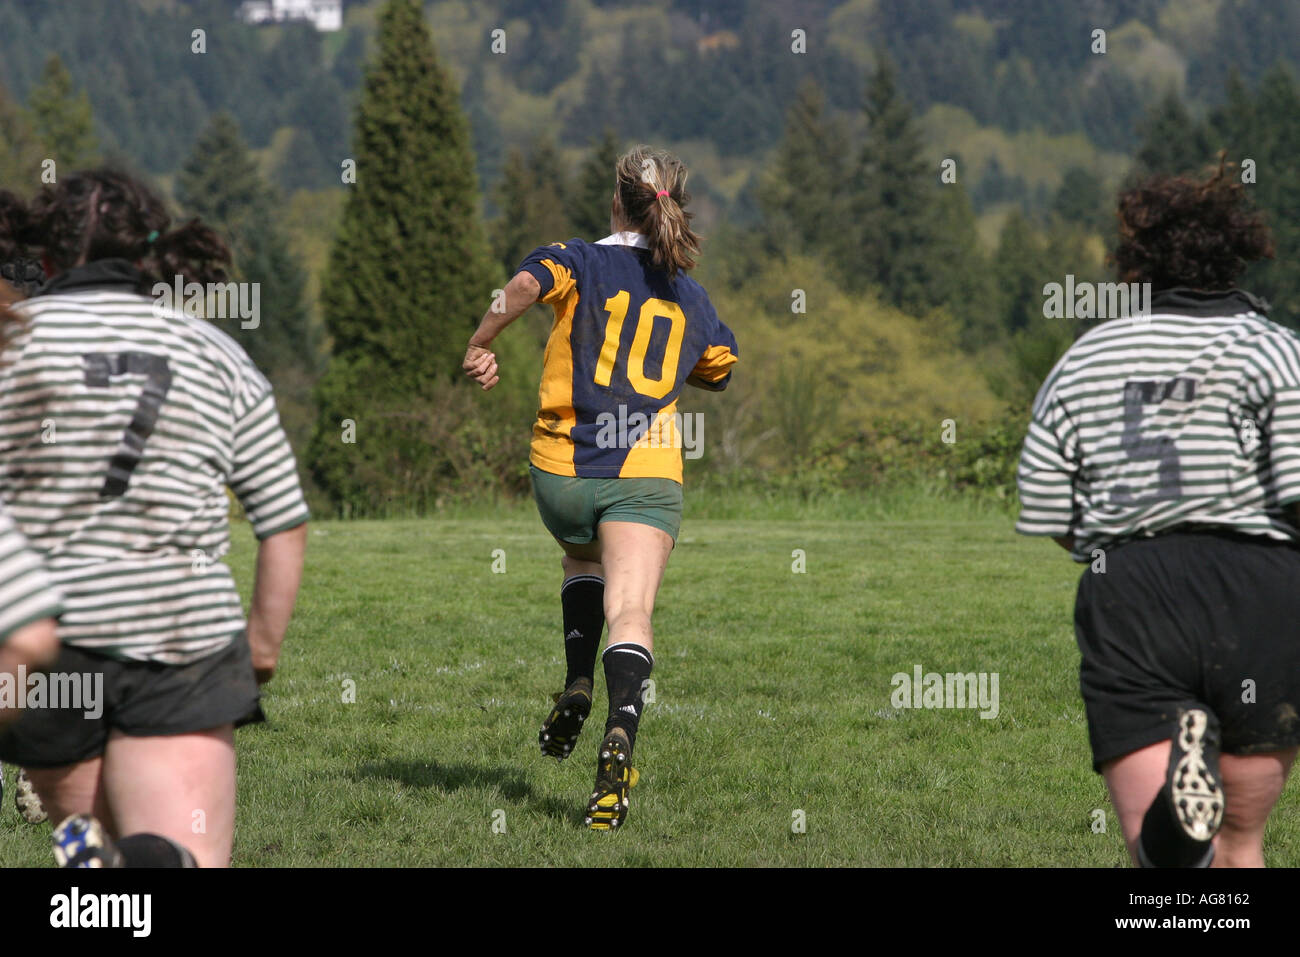 A women s rugby game in action as a woman runs with the ball at a game in Oregon Stock Photo